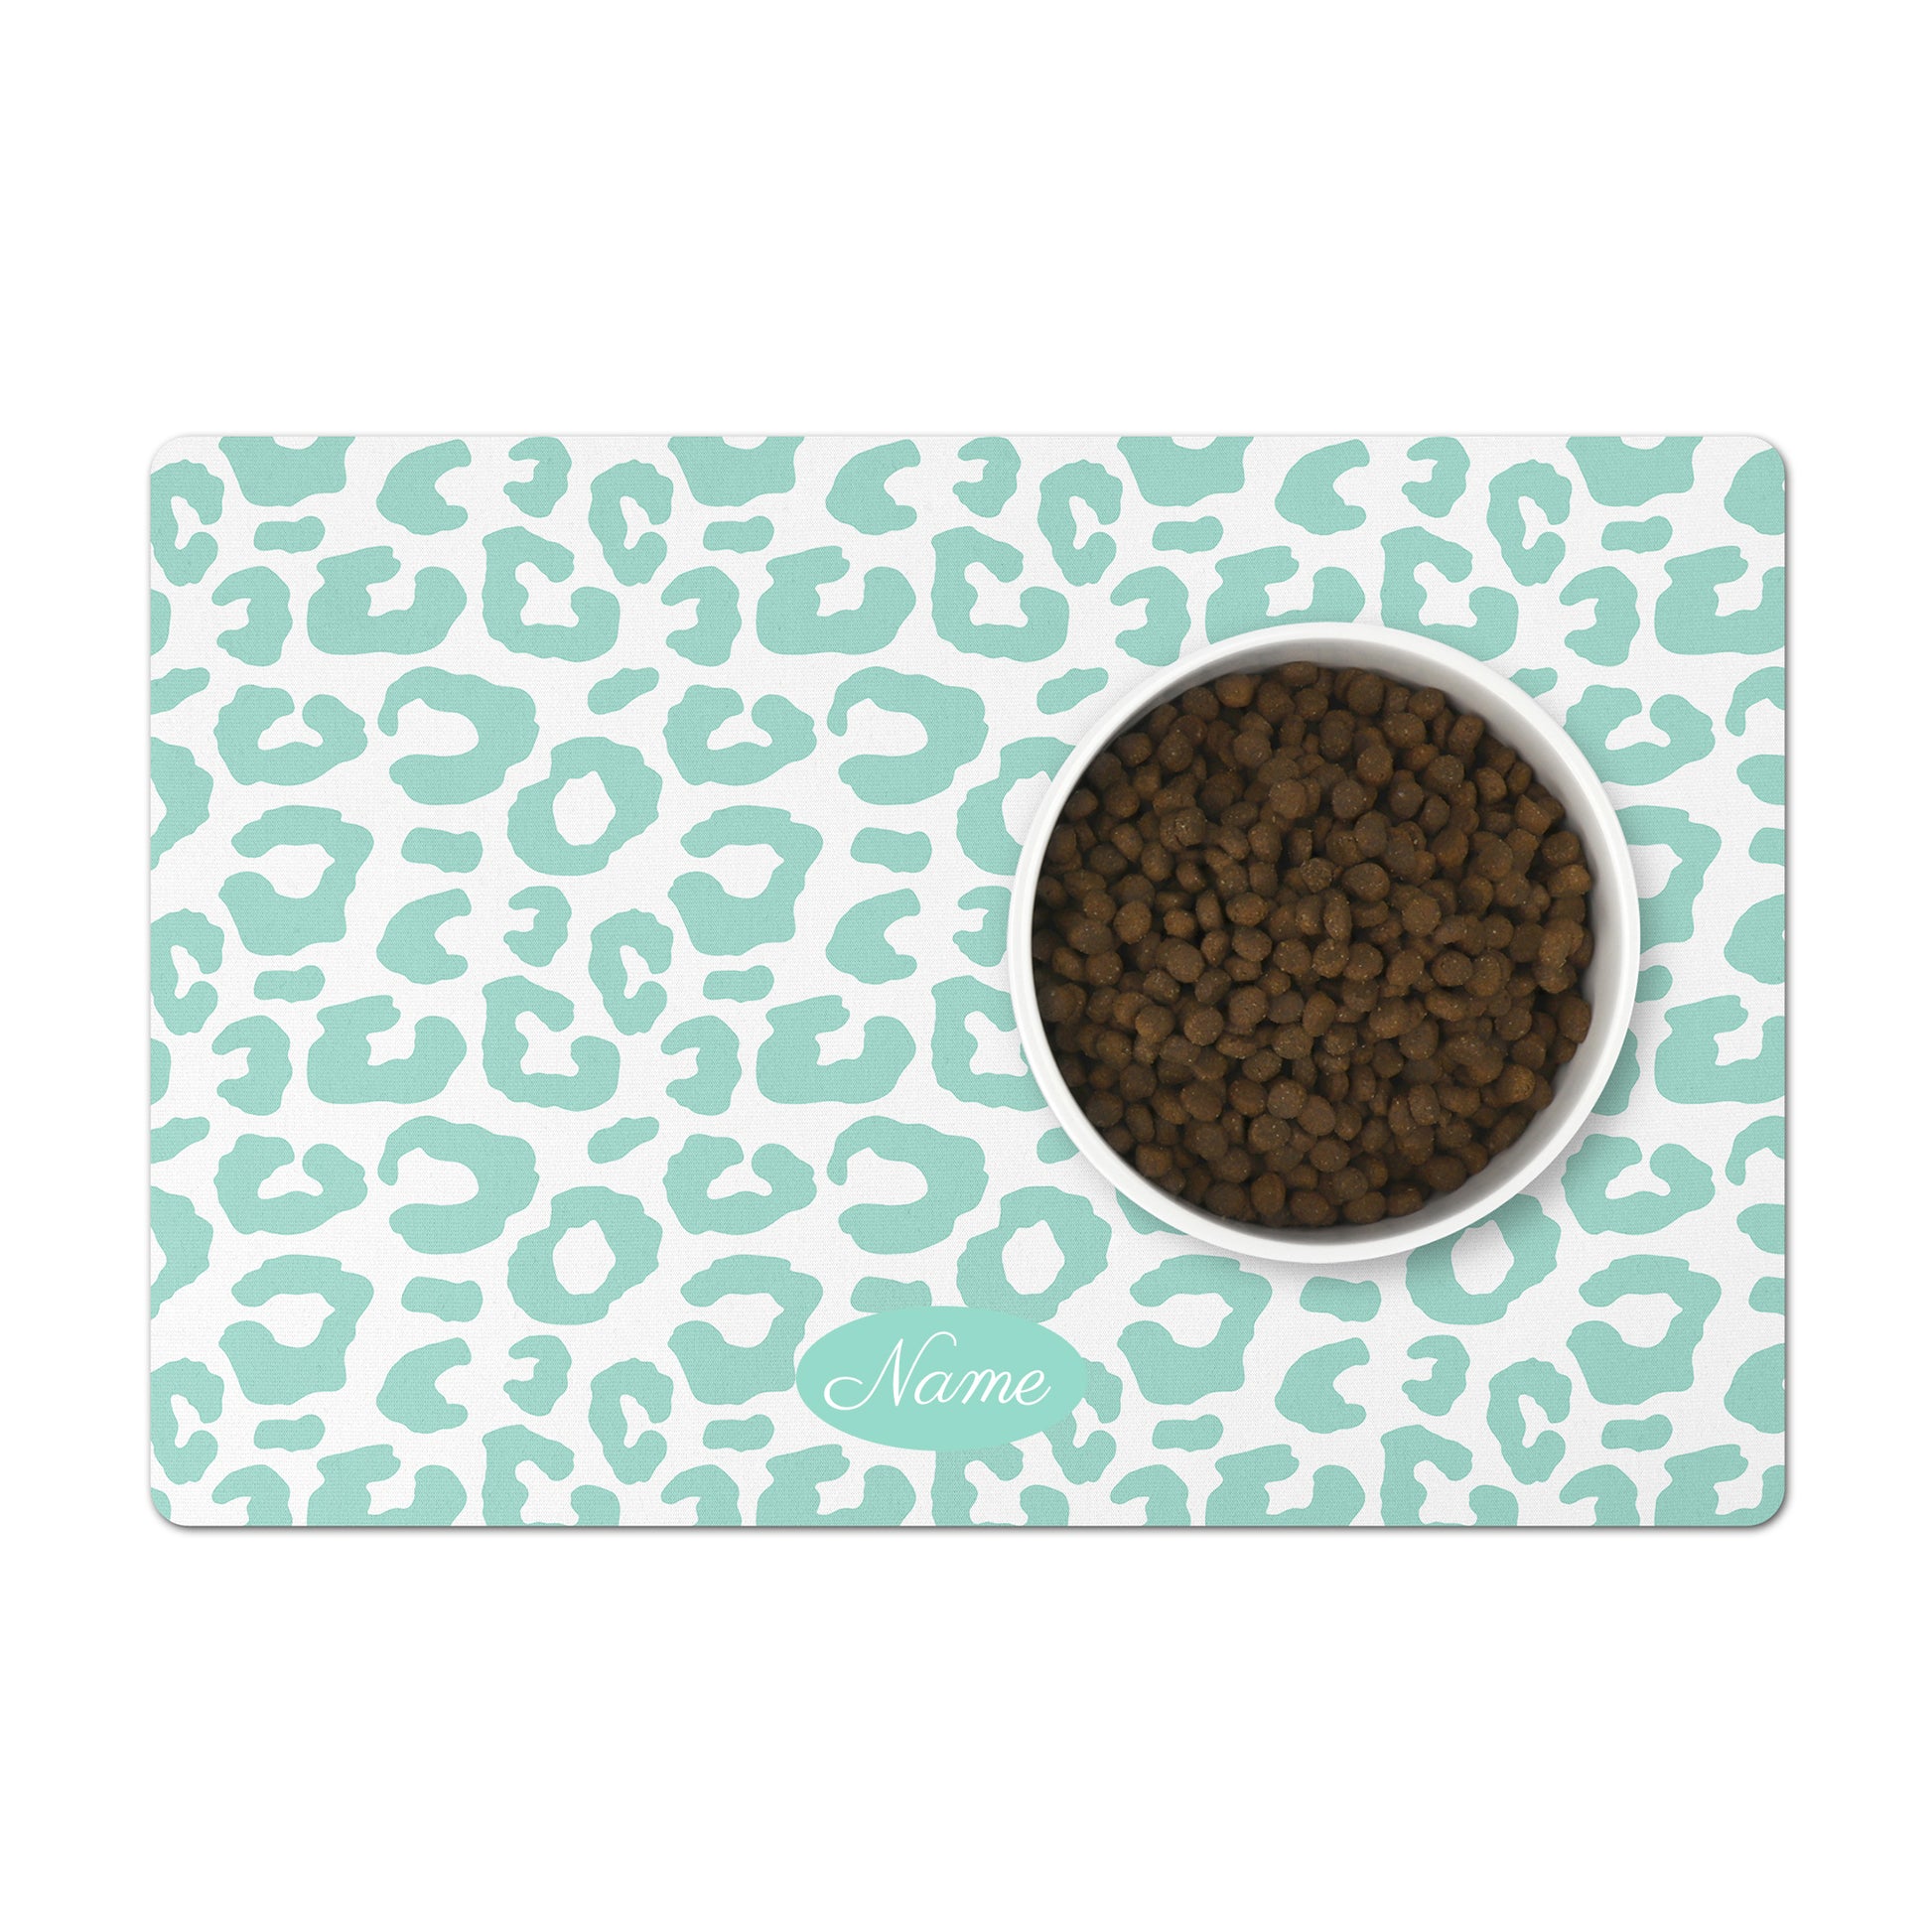 Customized pet feeding mat in peppermint and white leopard print.